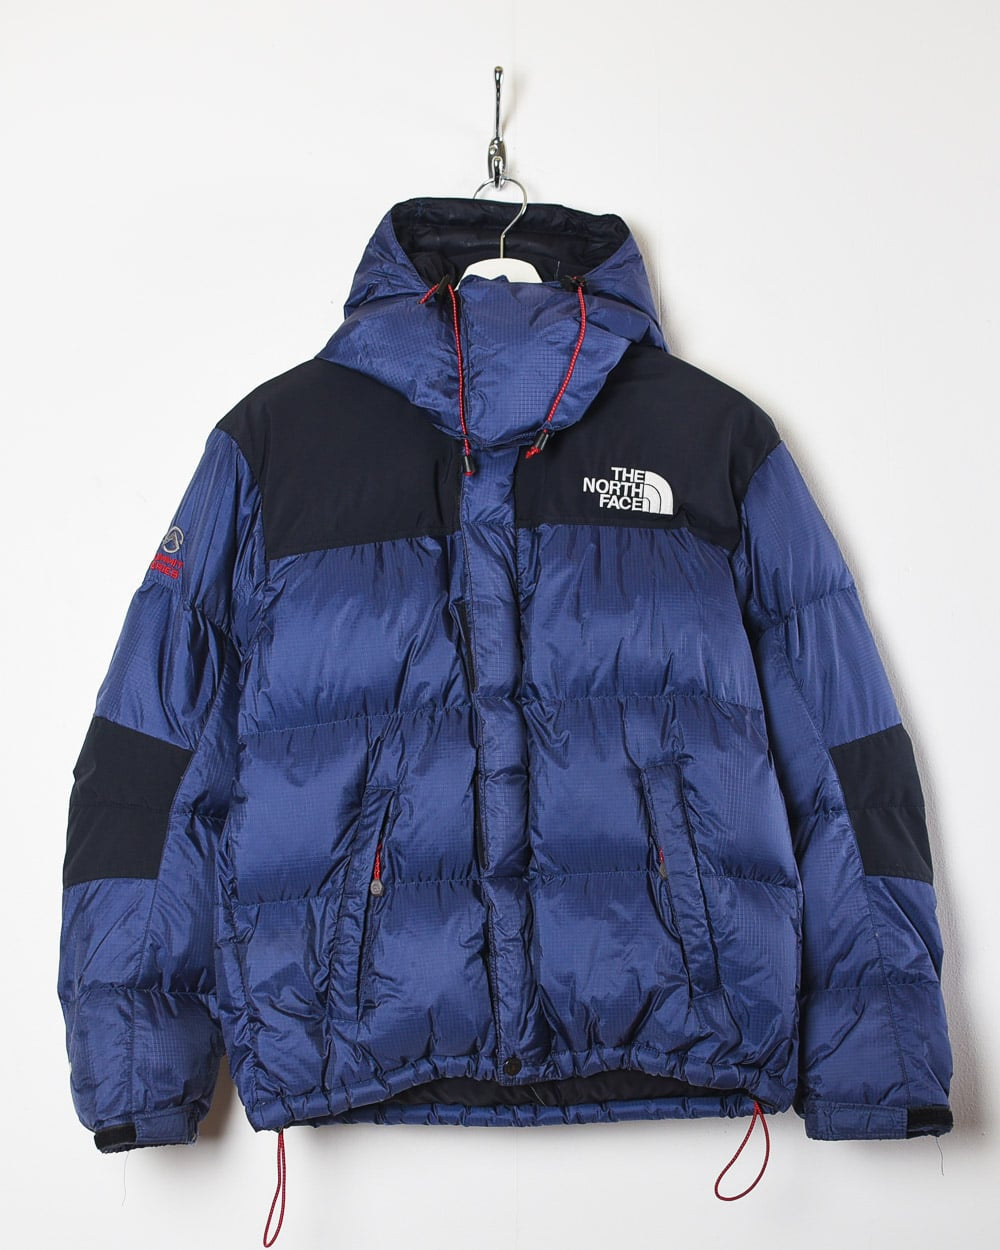 THE NORTH FACE / SUMMIT SERIES  700